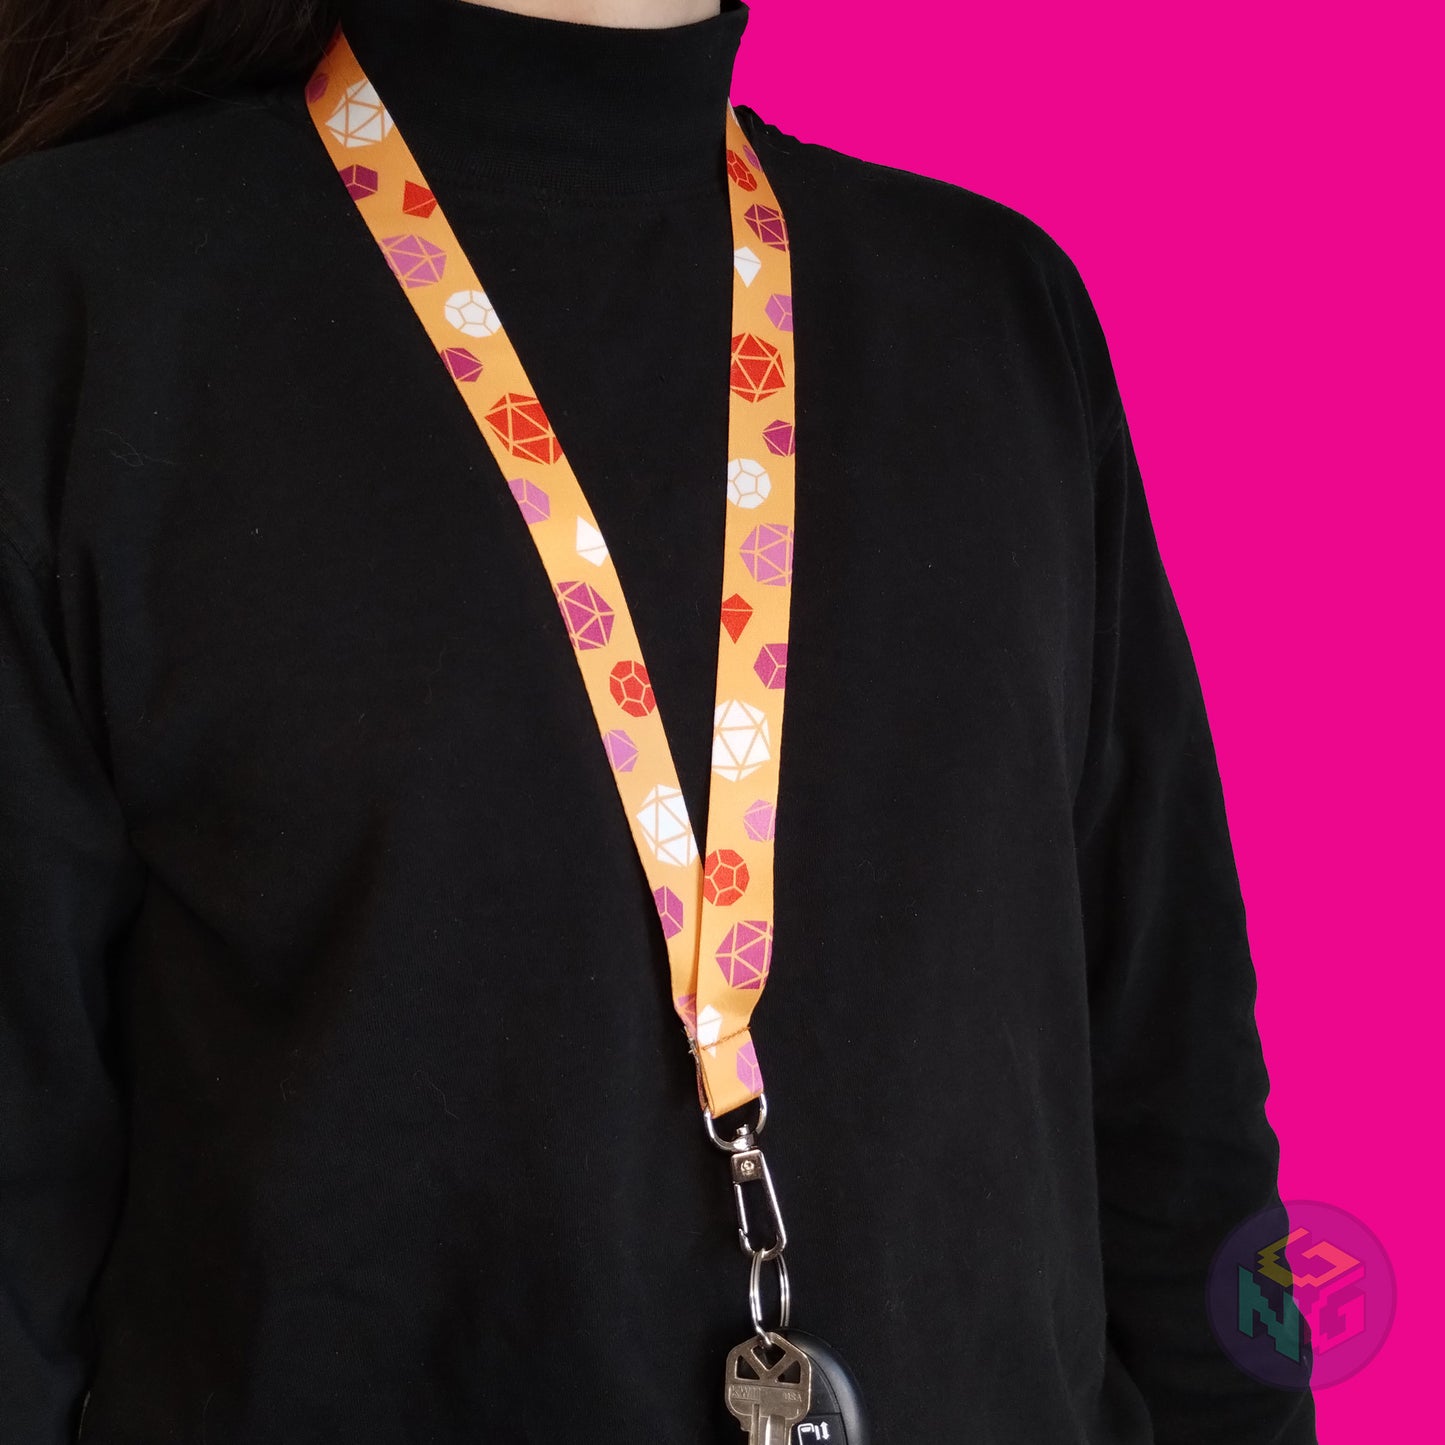 orange lesbian pride lanyard being worn by a flat chested person wearing a black turtleneck. The end of the lanyard falls between their sternum and bellybutton and has a key fob clipped to the end